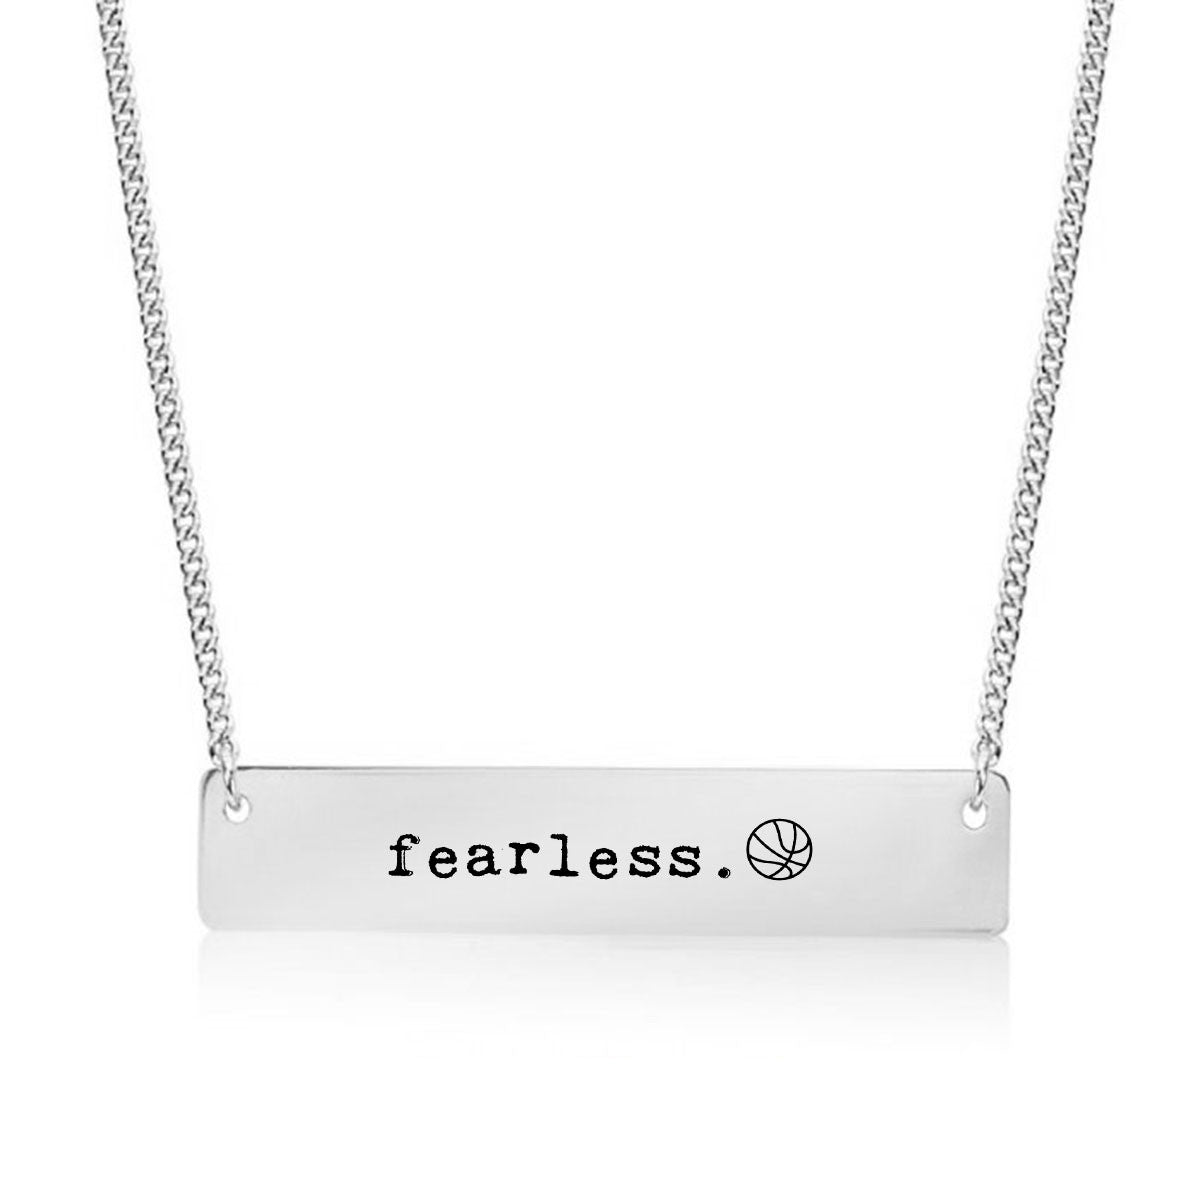 Fearless Basketball Gold / Silver Bar Necklace - pipercleo.com